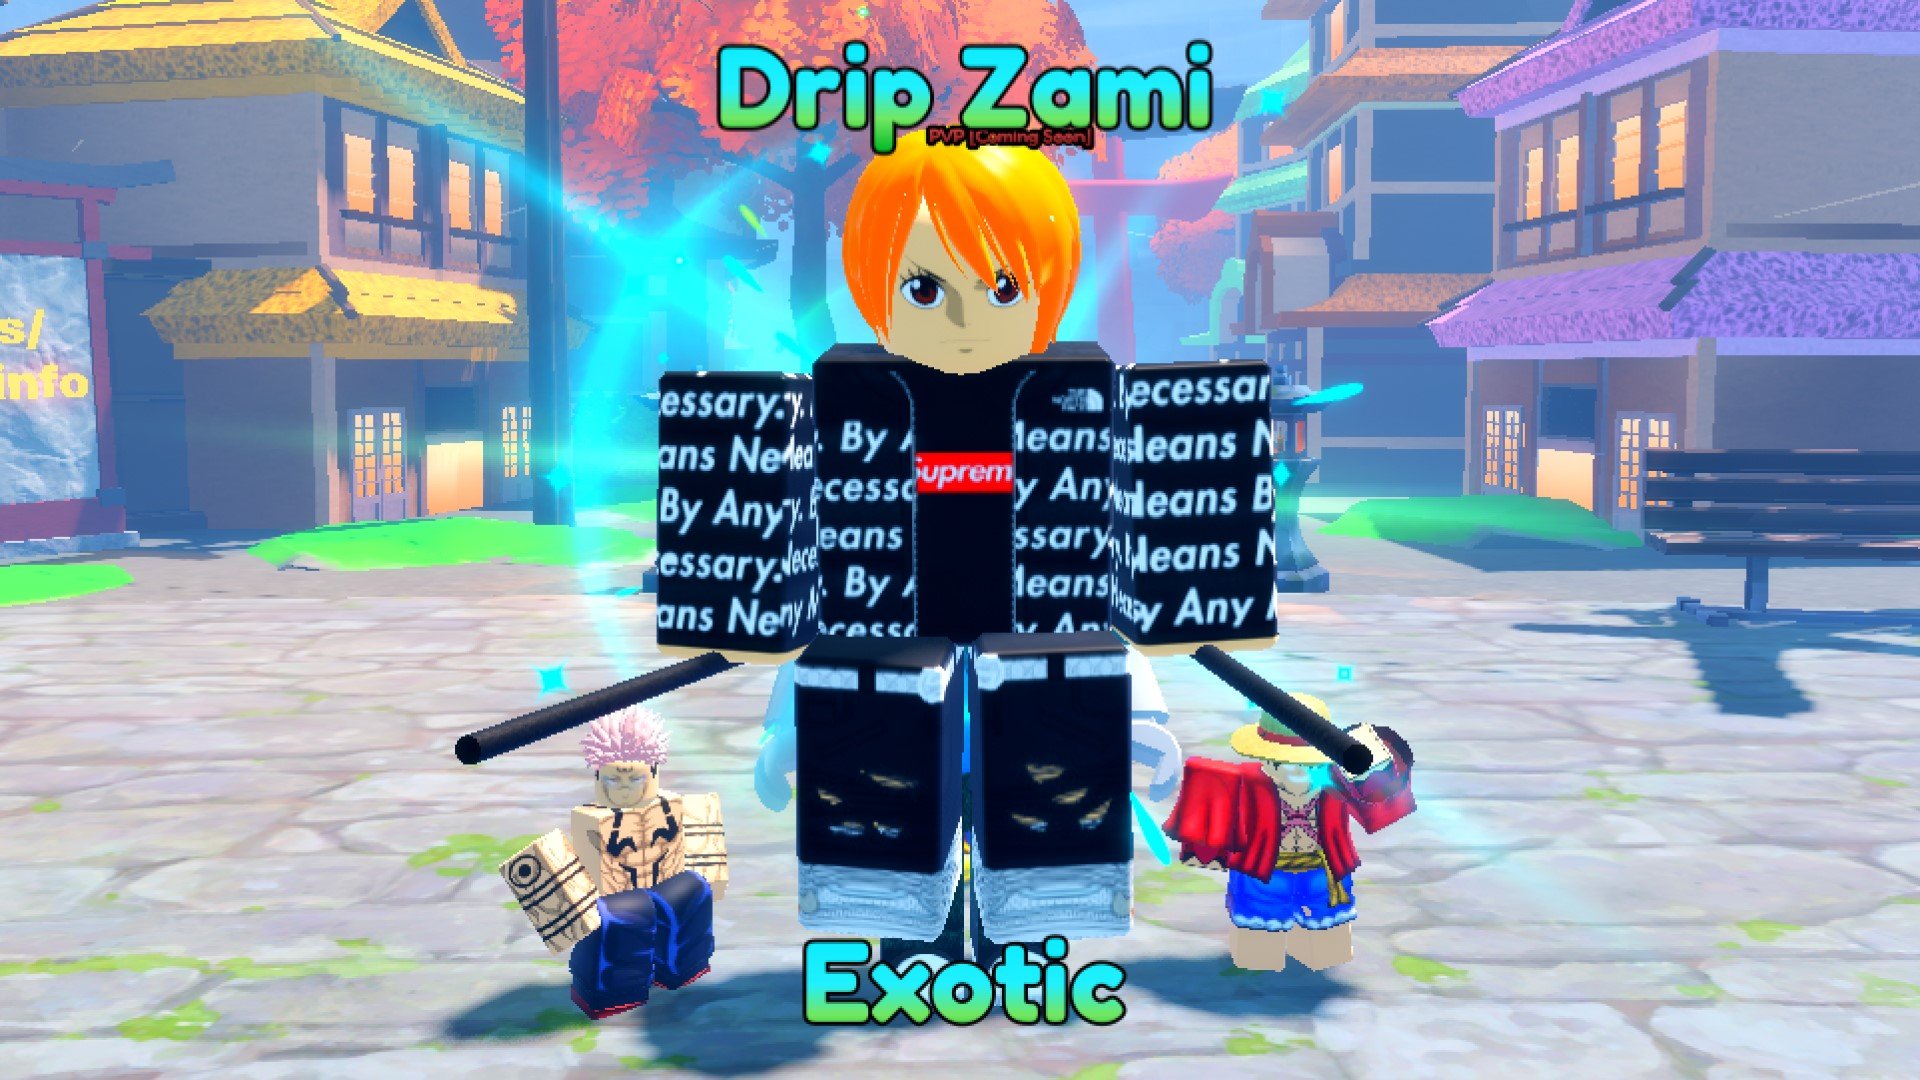 An image of the Drip Zami character from the Roblox game Anime Last Stand. In the background, an urban street scene.